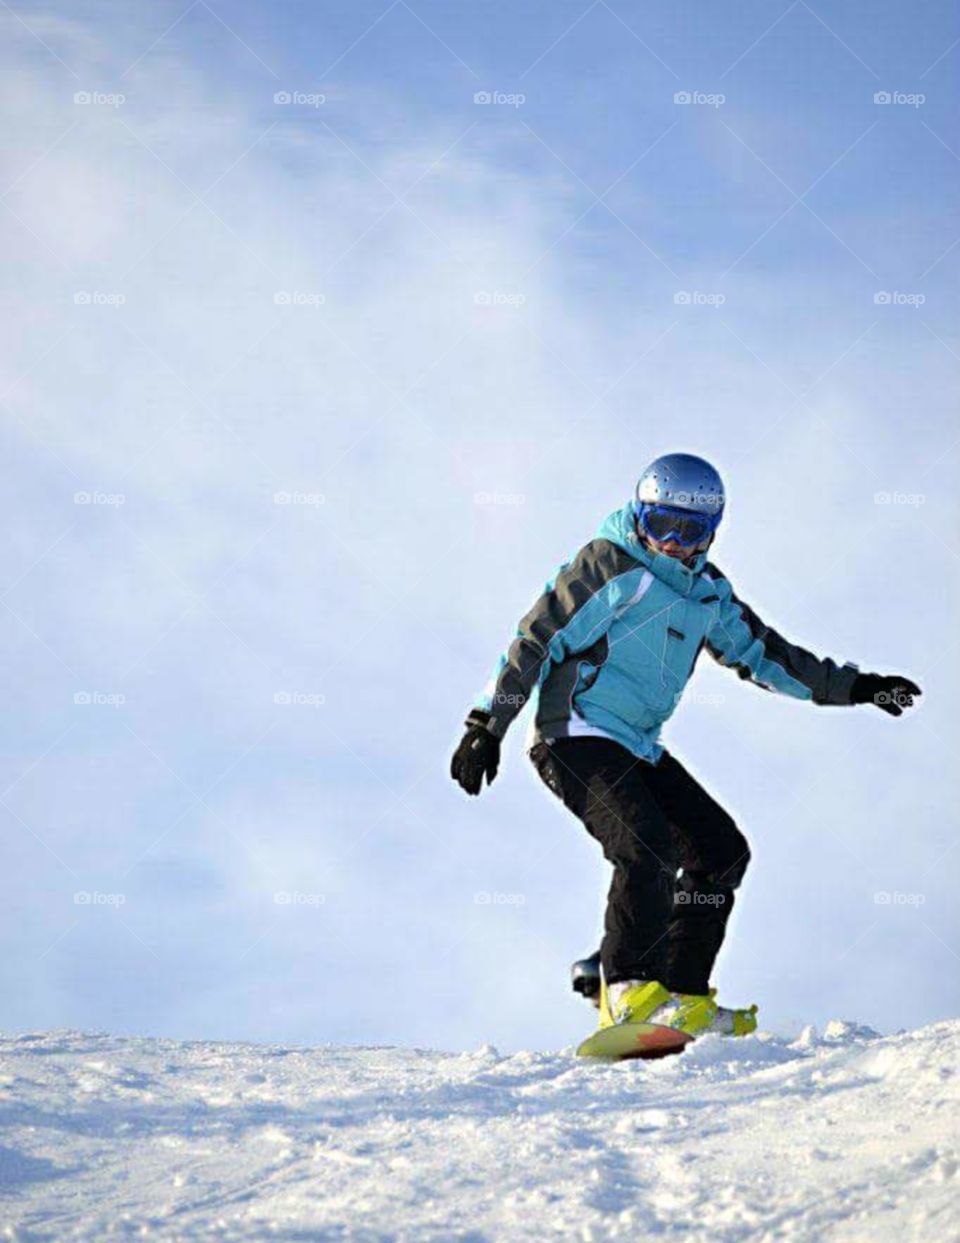 snowboarder in a blue suit rolls on the snow
 